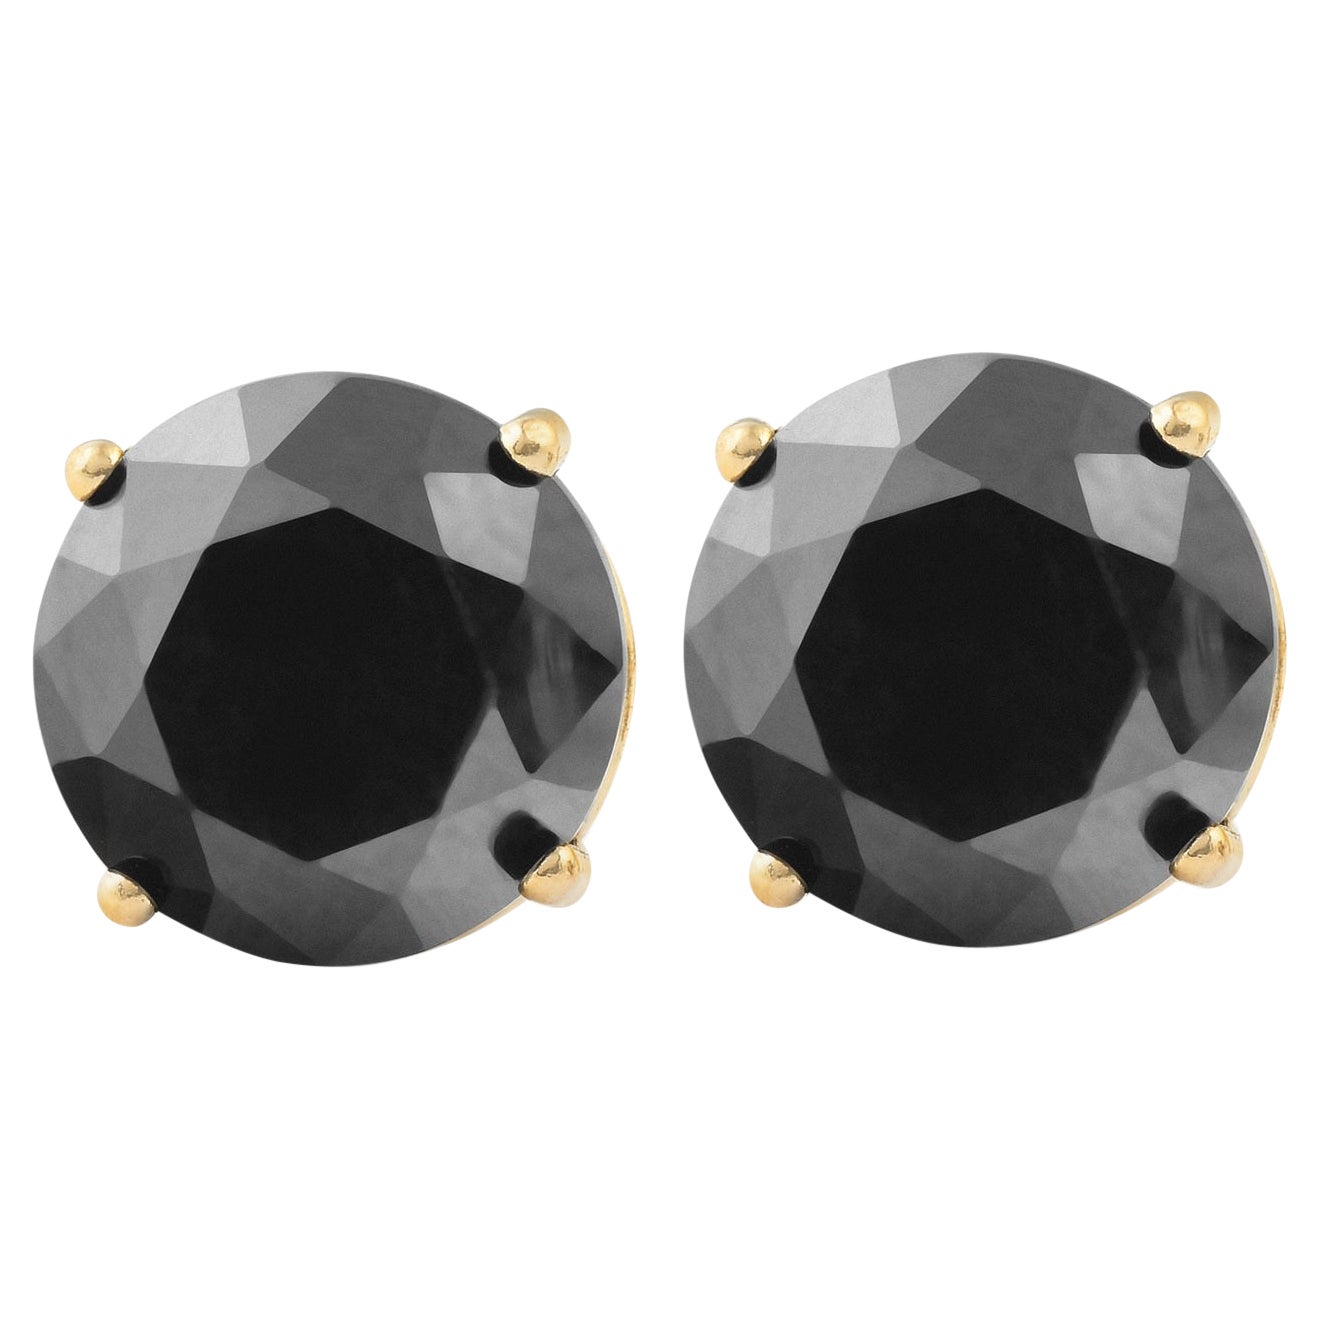 3.7 Carat Total Round Black Diamond Solitaire Stud Earrings in 14 K Yellow Gold